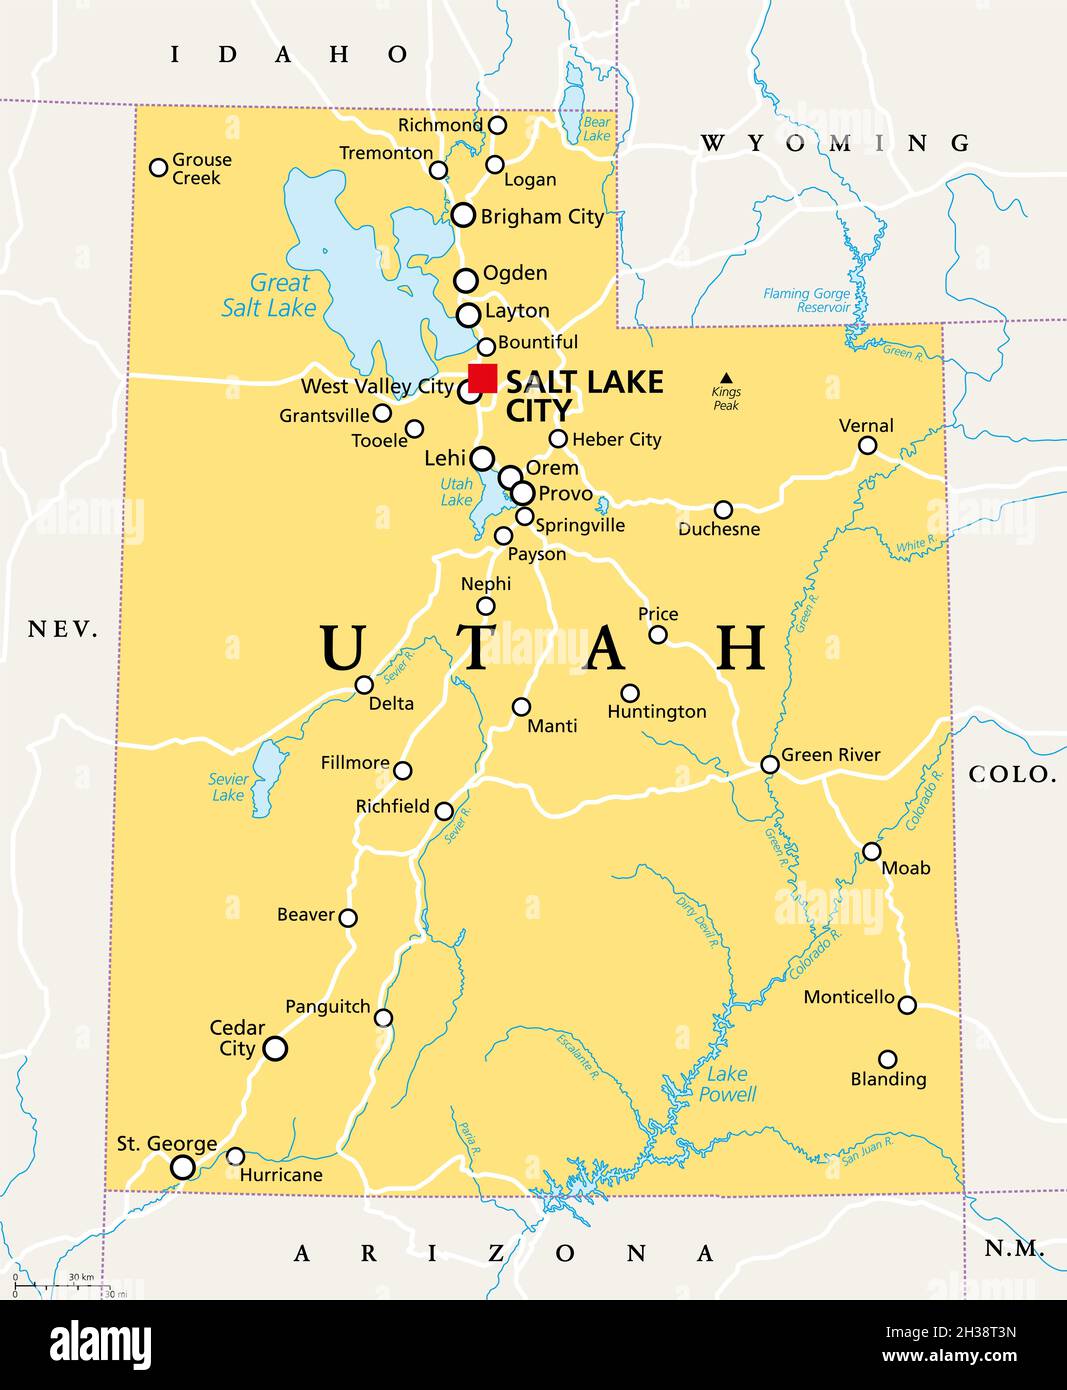 Utah, UT, political map, with the capital Salt Lake City. State in the Mountain West subregion of the Western United States of America. Beehive State. Stock Photo